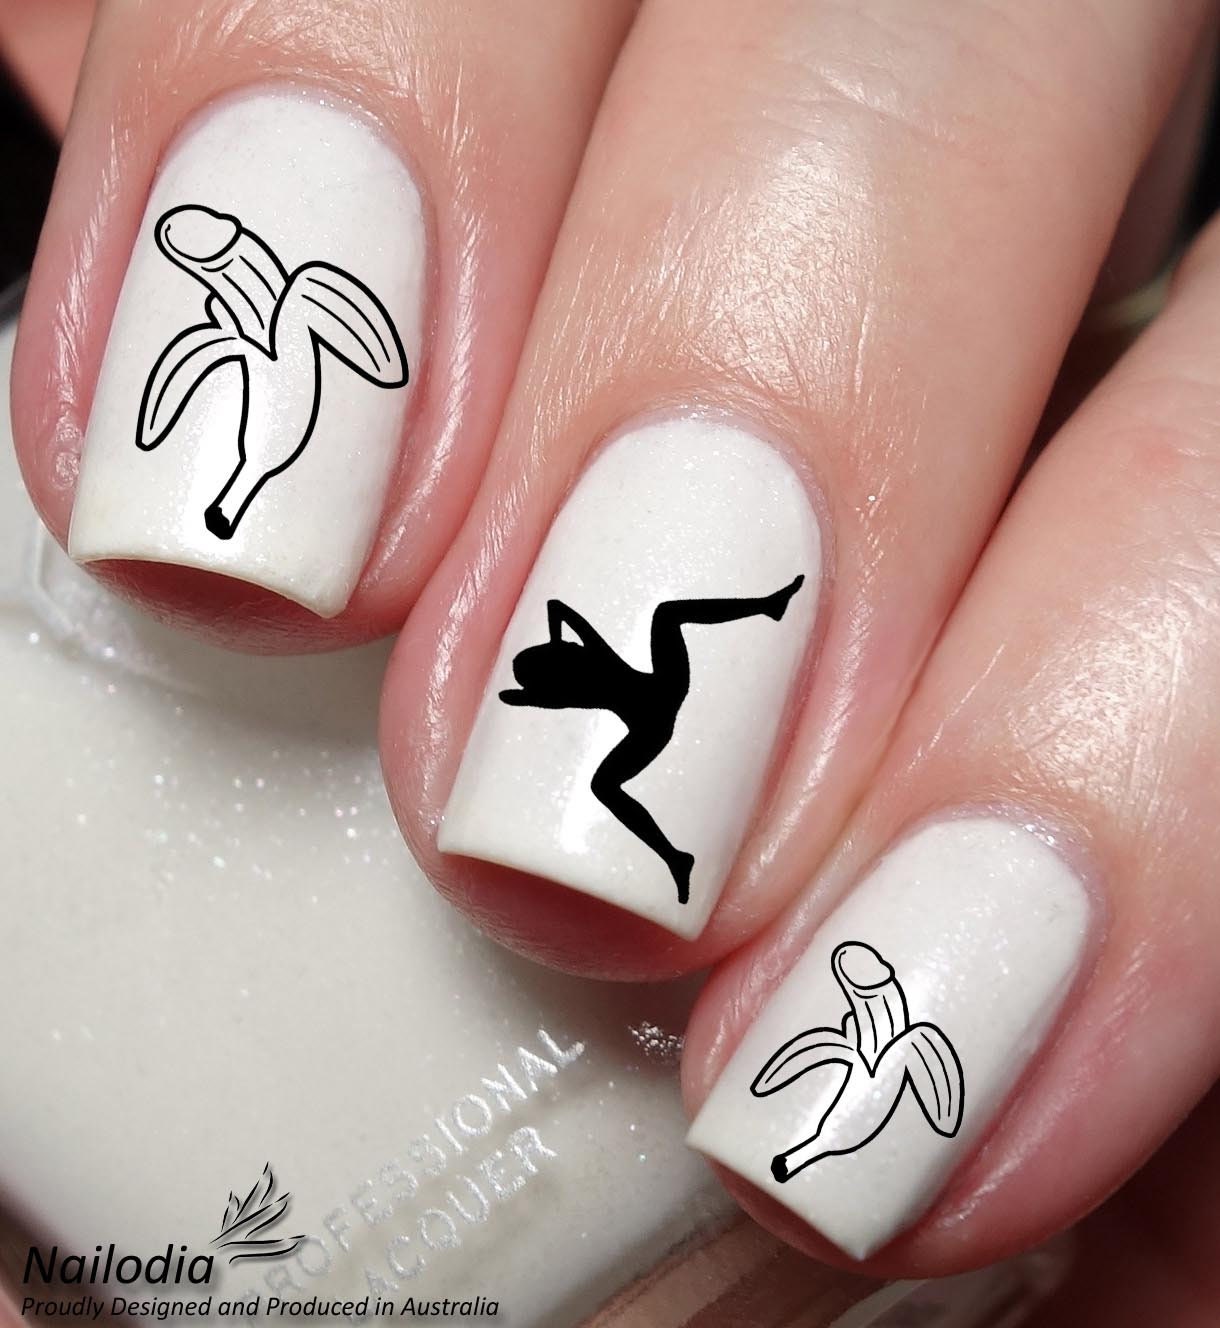 Playful Summer Nail Designs to Brighten Your Day